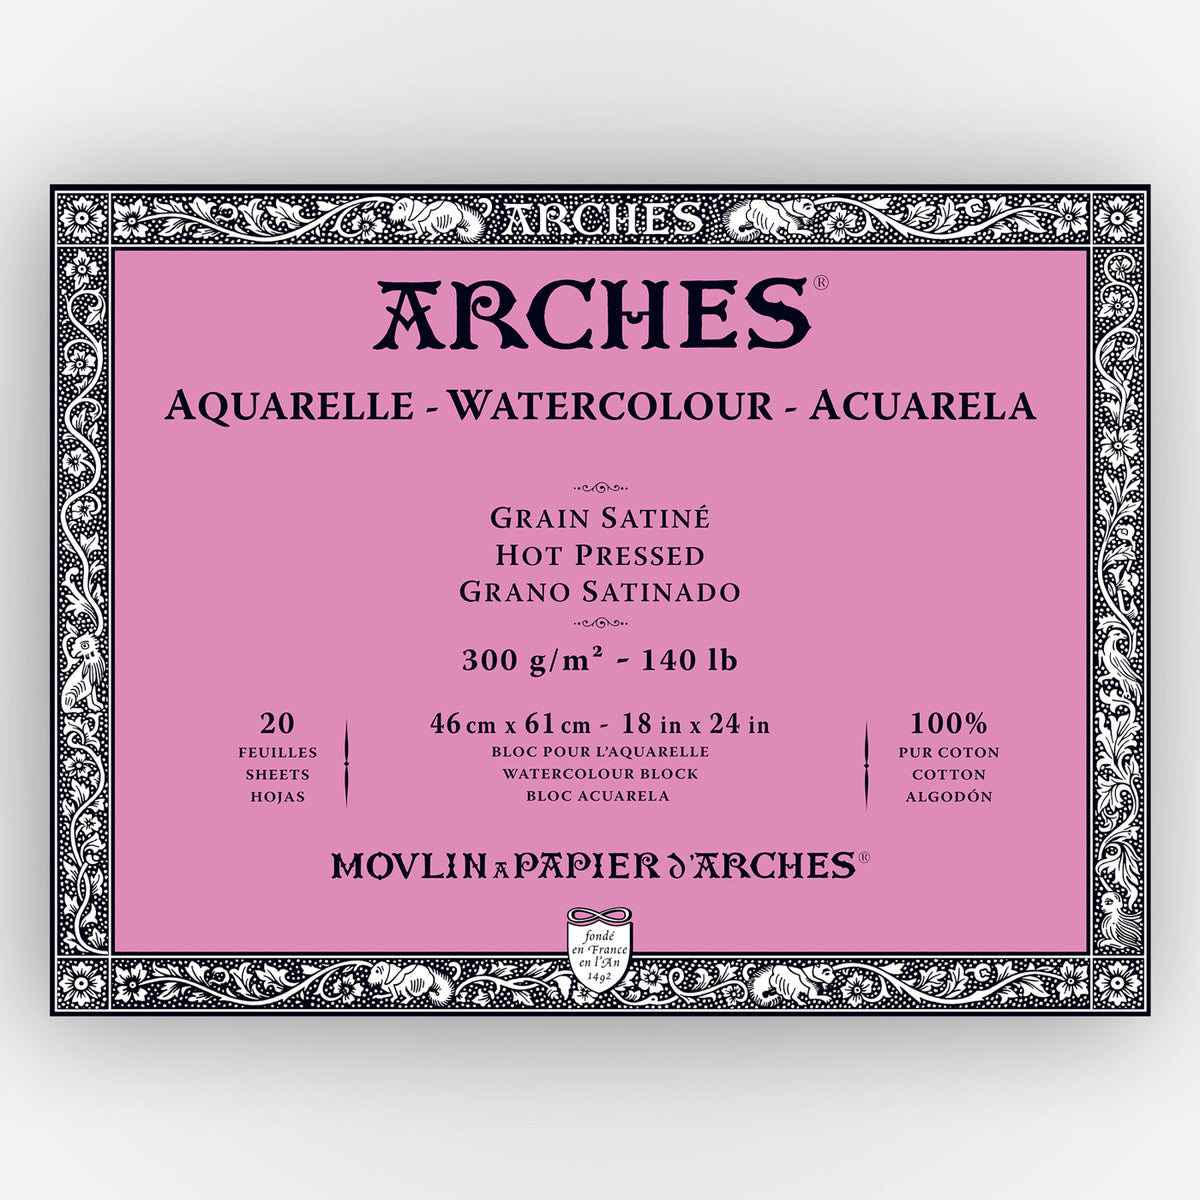 Arches Hot Pressed 300g 46x61cm 20 sheets